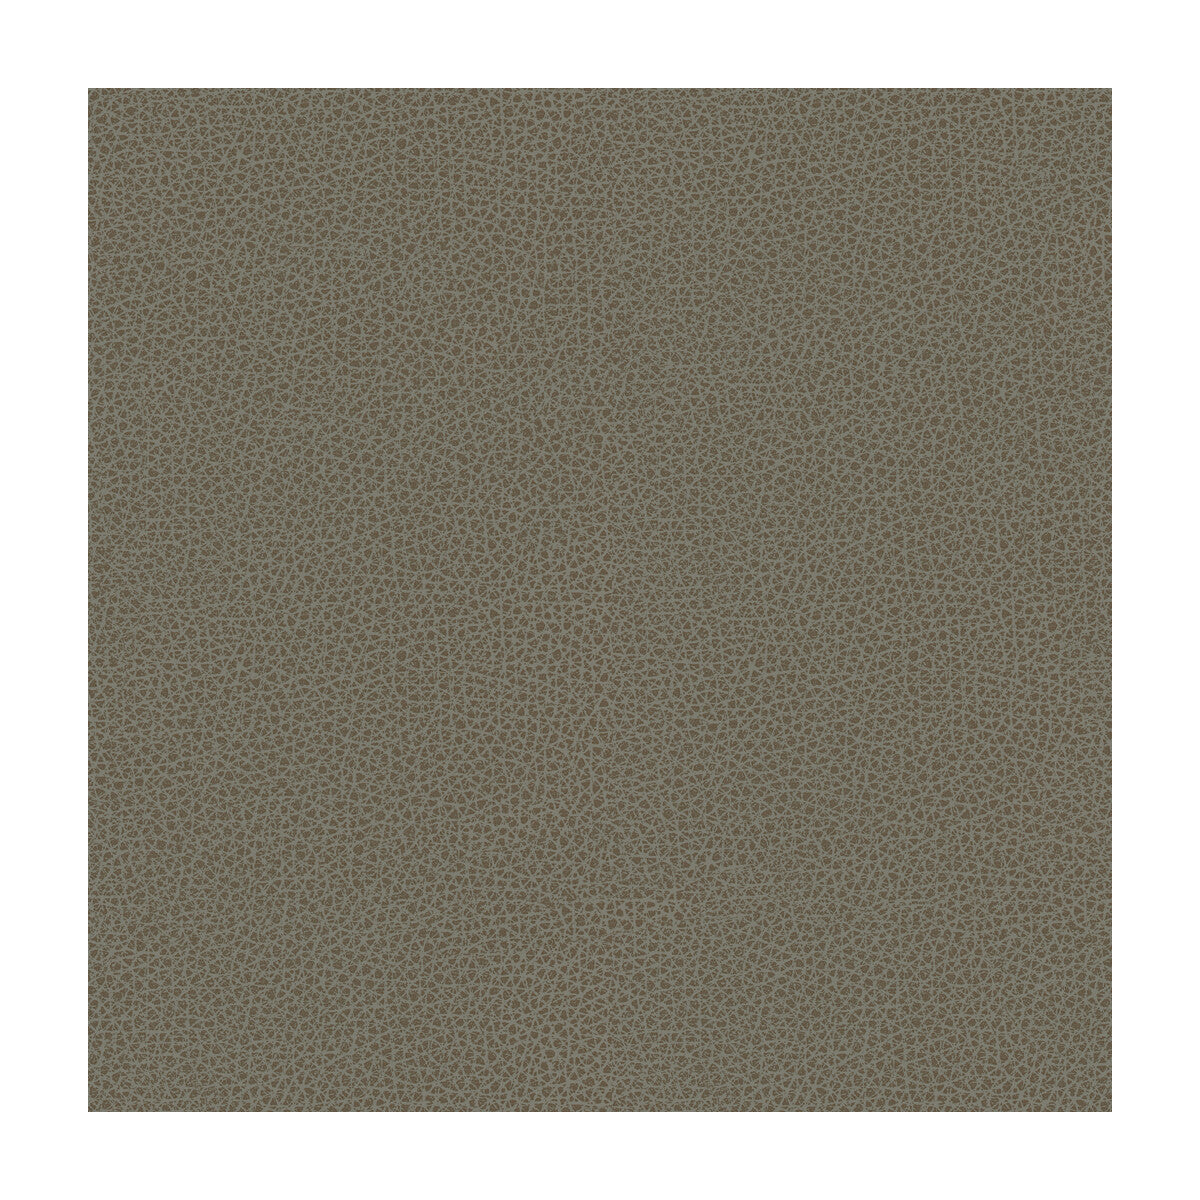 Kravet Contract fabric in bess-11 color - pattern BESS.11.0 - by Kravet Contract